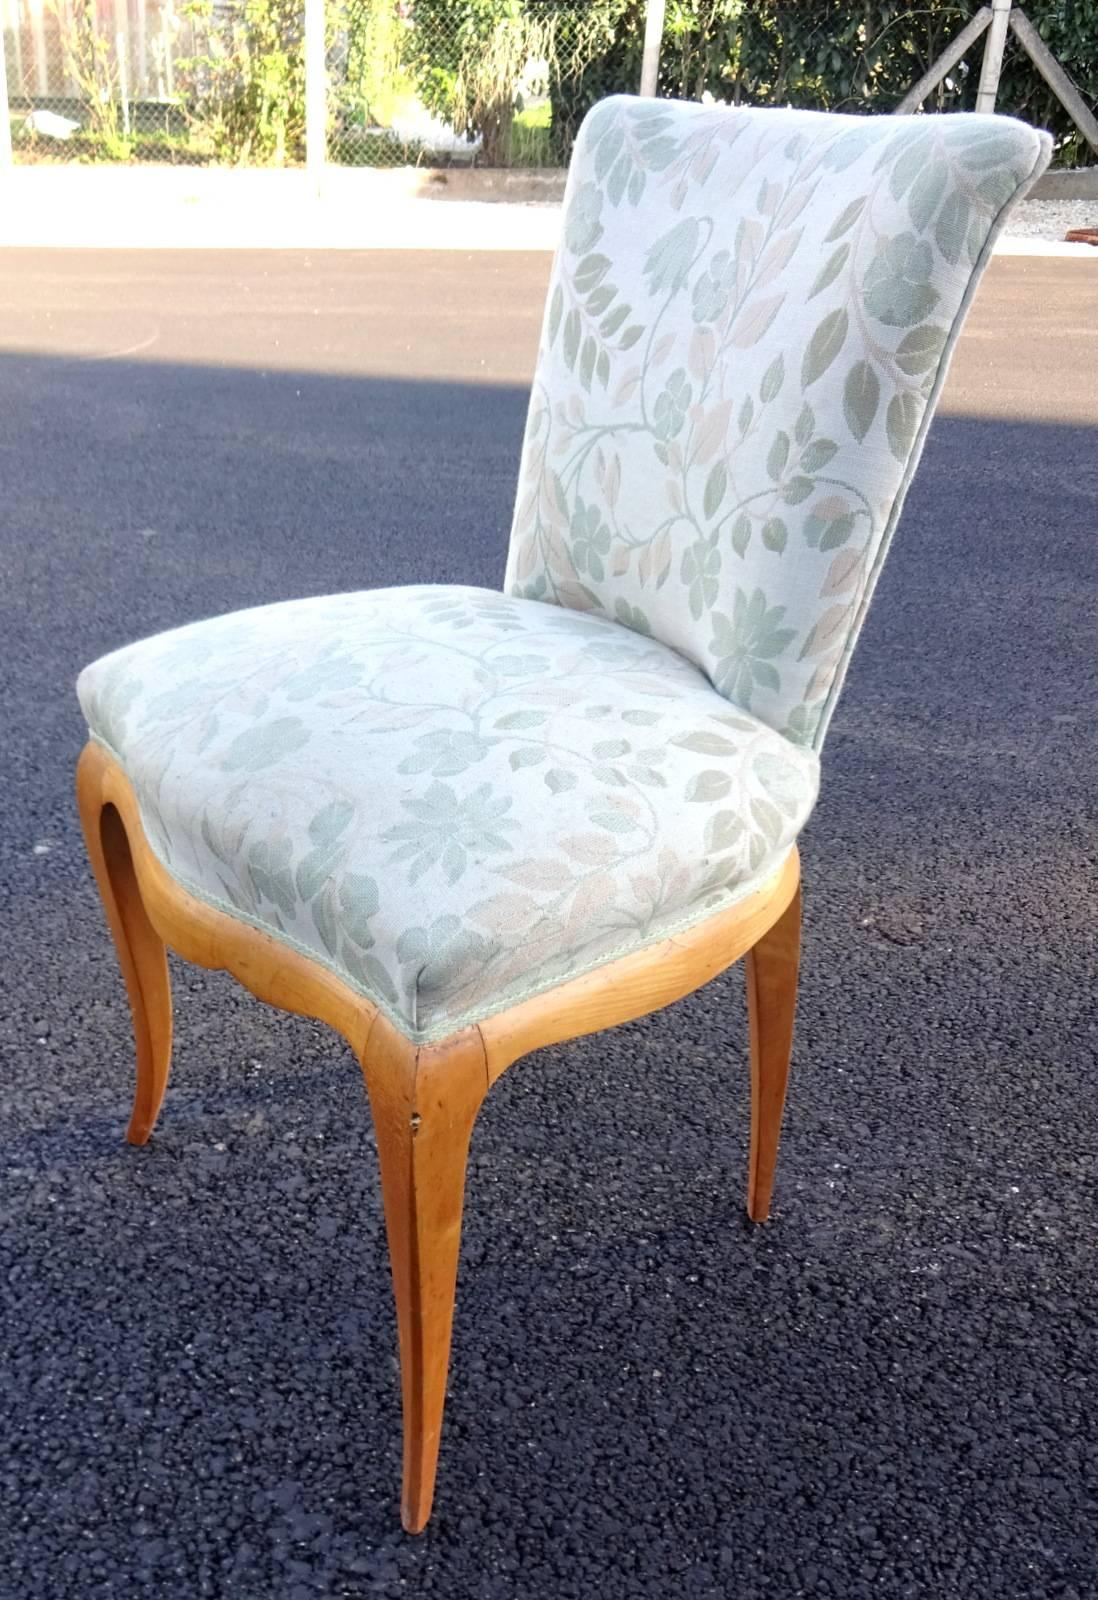 Elegant chair in sycamore designed in the 1940s.